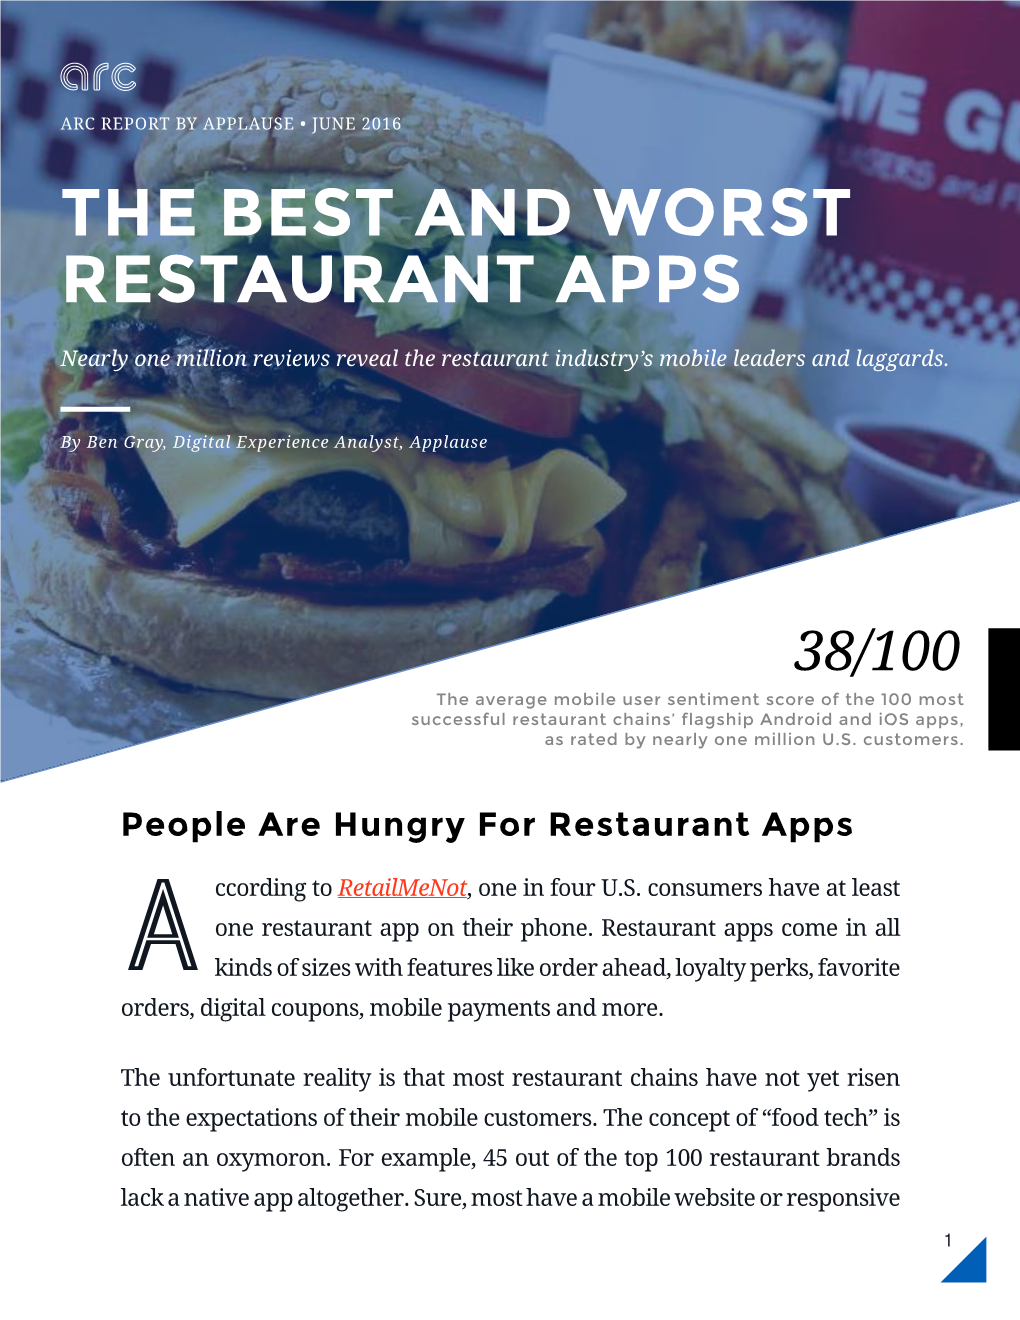 The Best and Worst Restaurant Apps